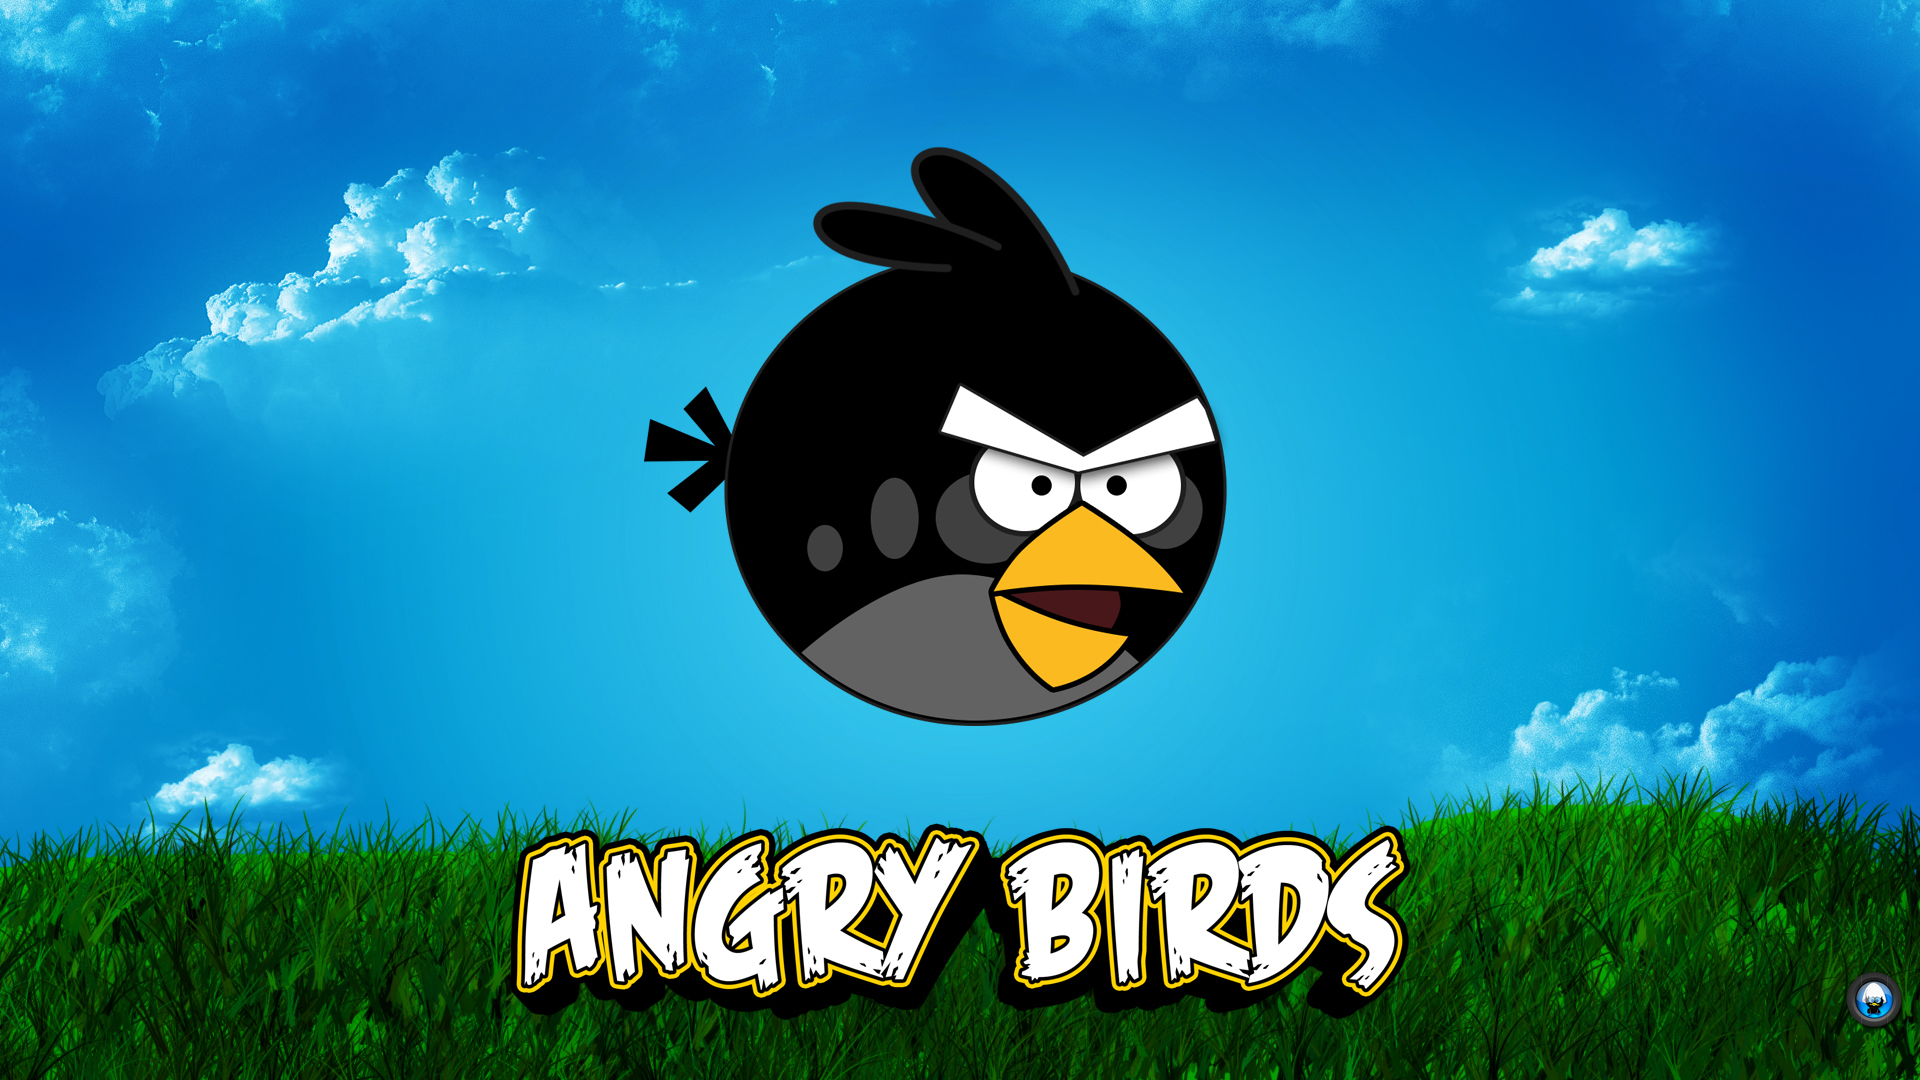 Angry Birds Red Bird Game Games 1920x1080 1920x1080